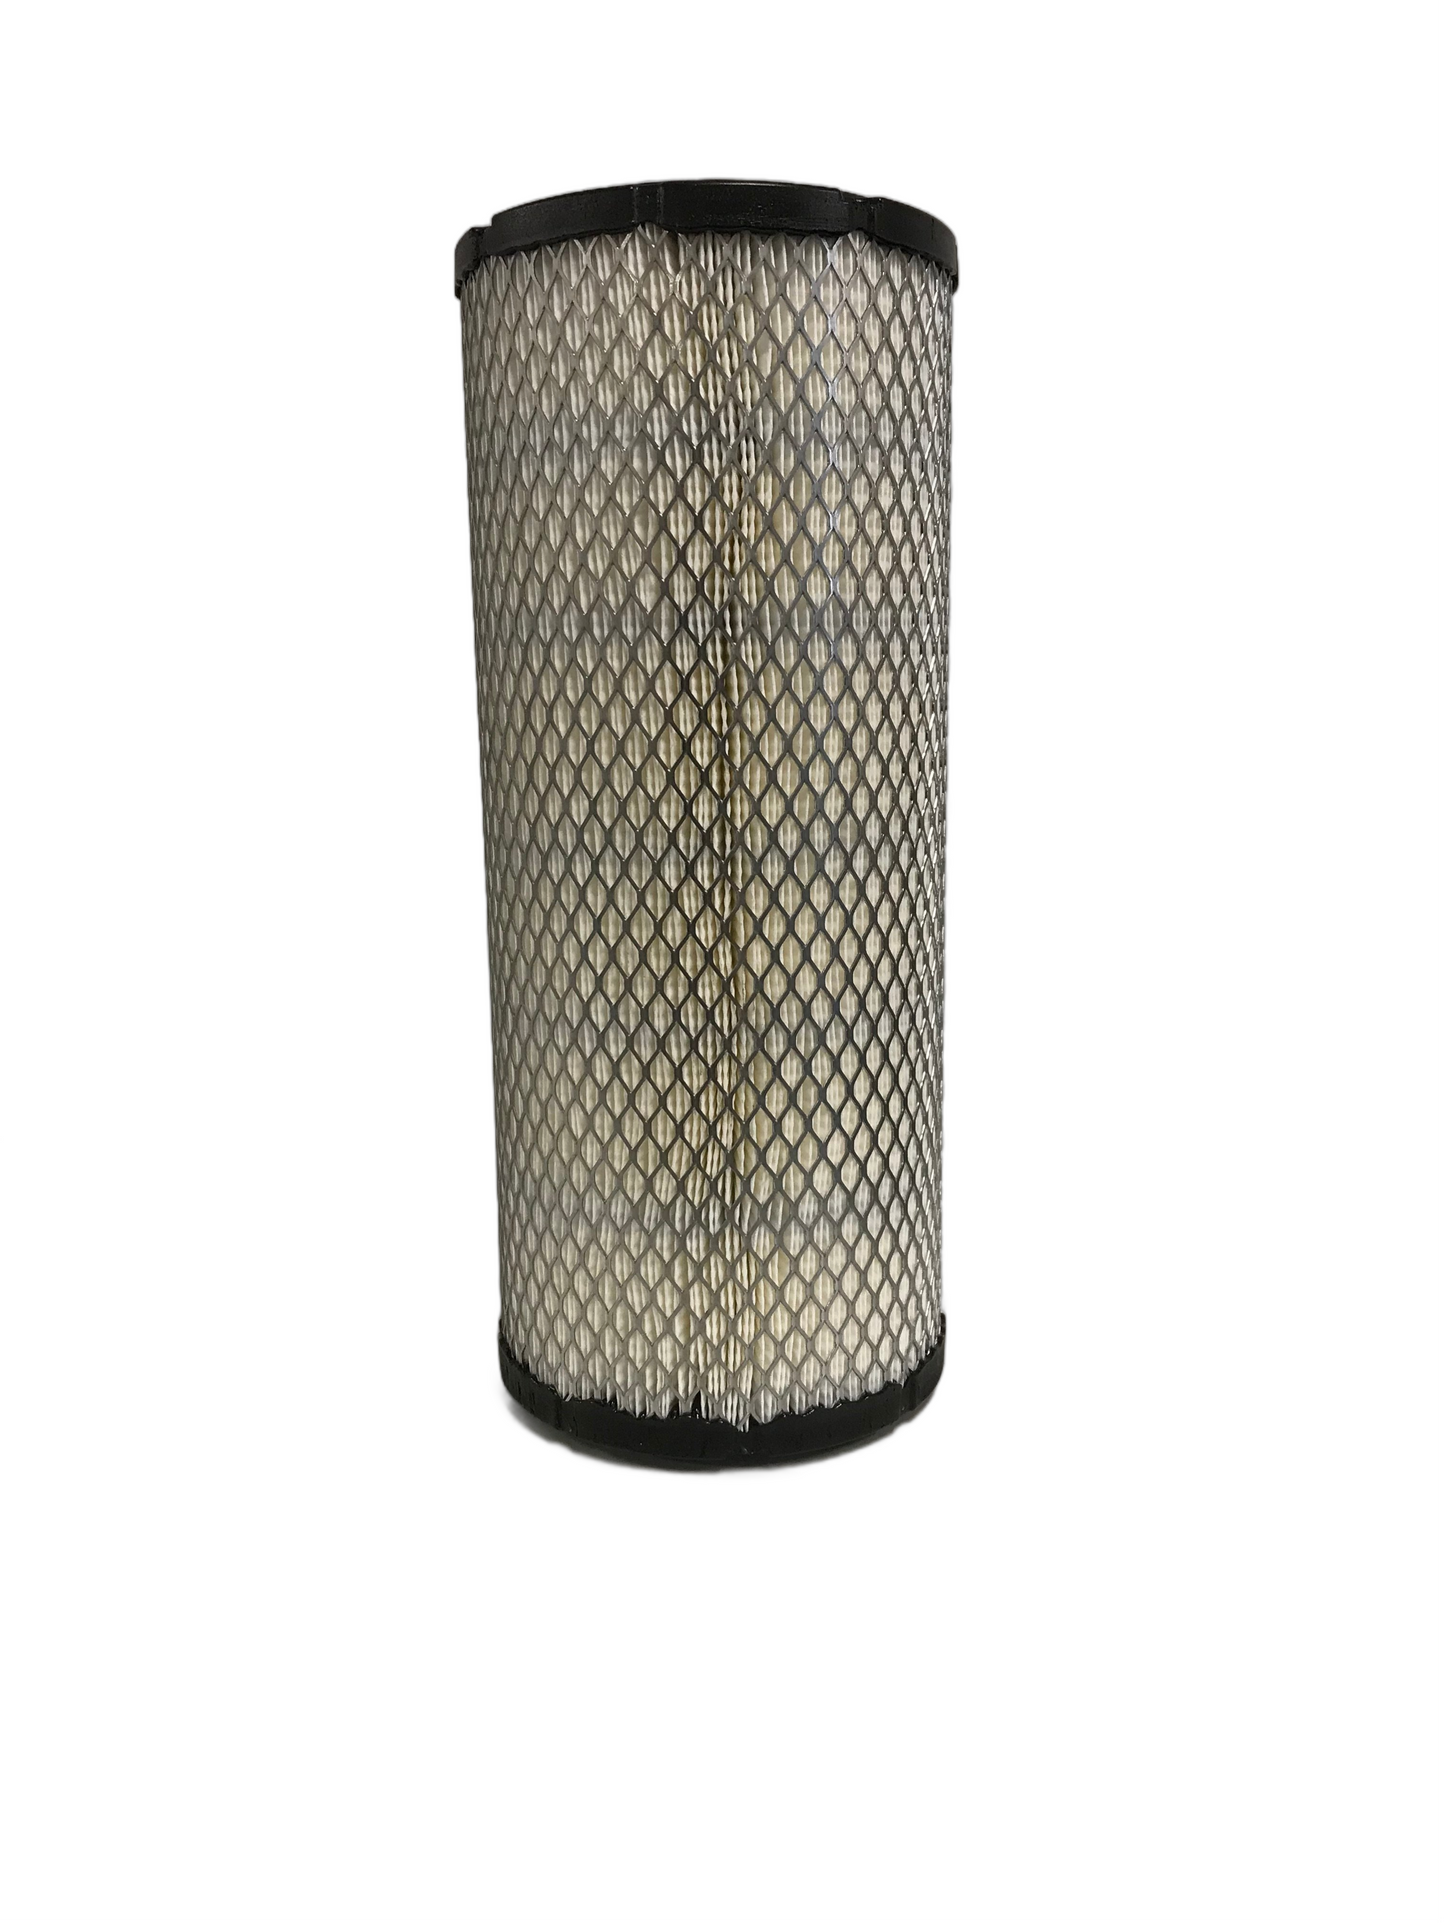 BaldwinFilter RS3542: Superior filtration solution for optimal protection